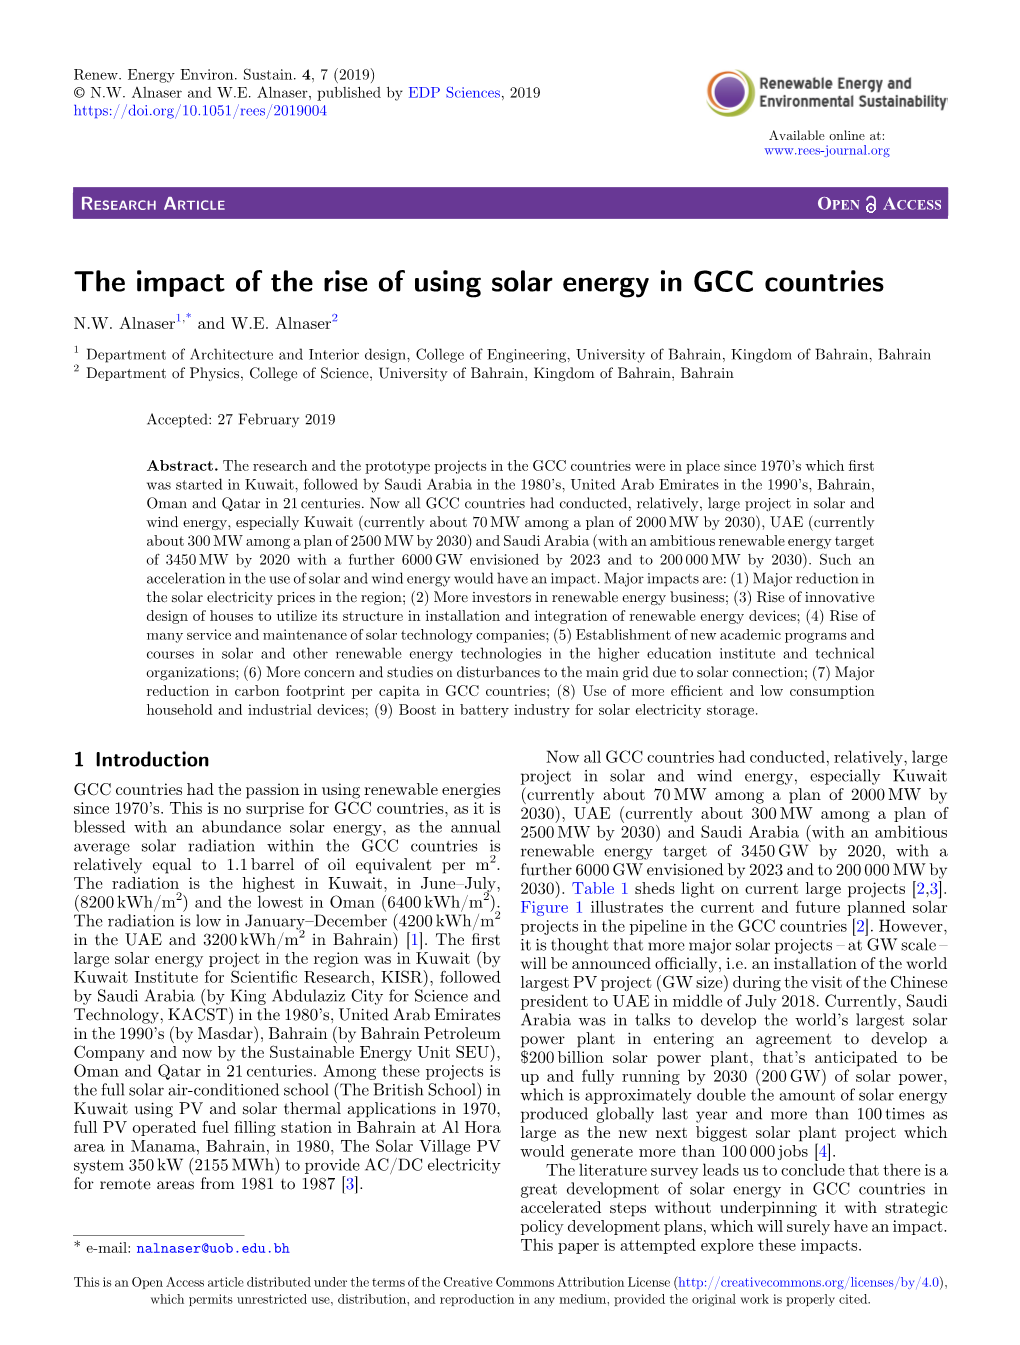 The Impact of the Rise of Using Solar Energy in GCC Countries